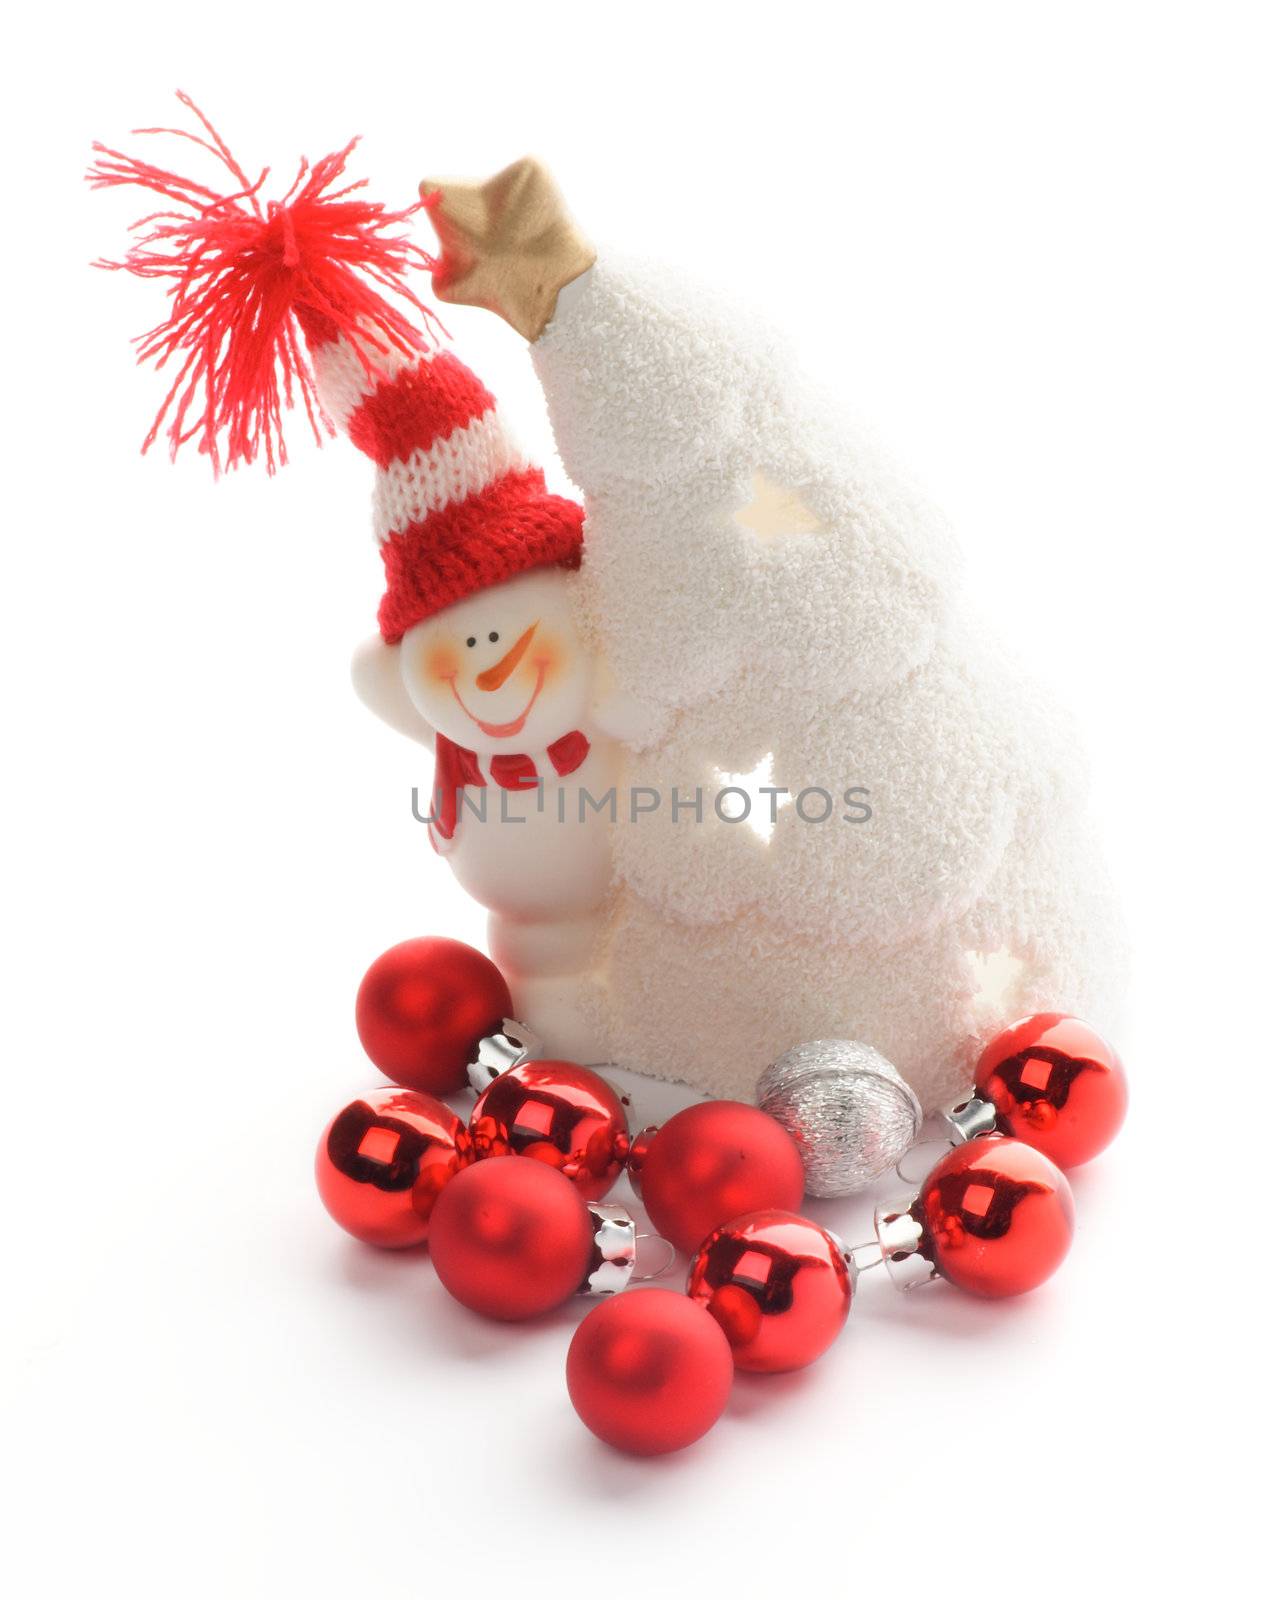 Snowman and Baubles by zhekos